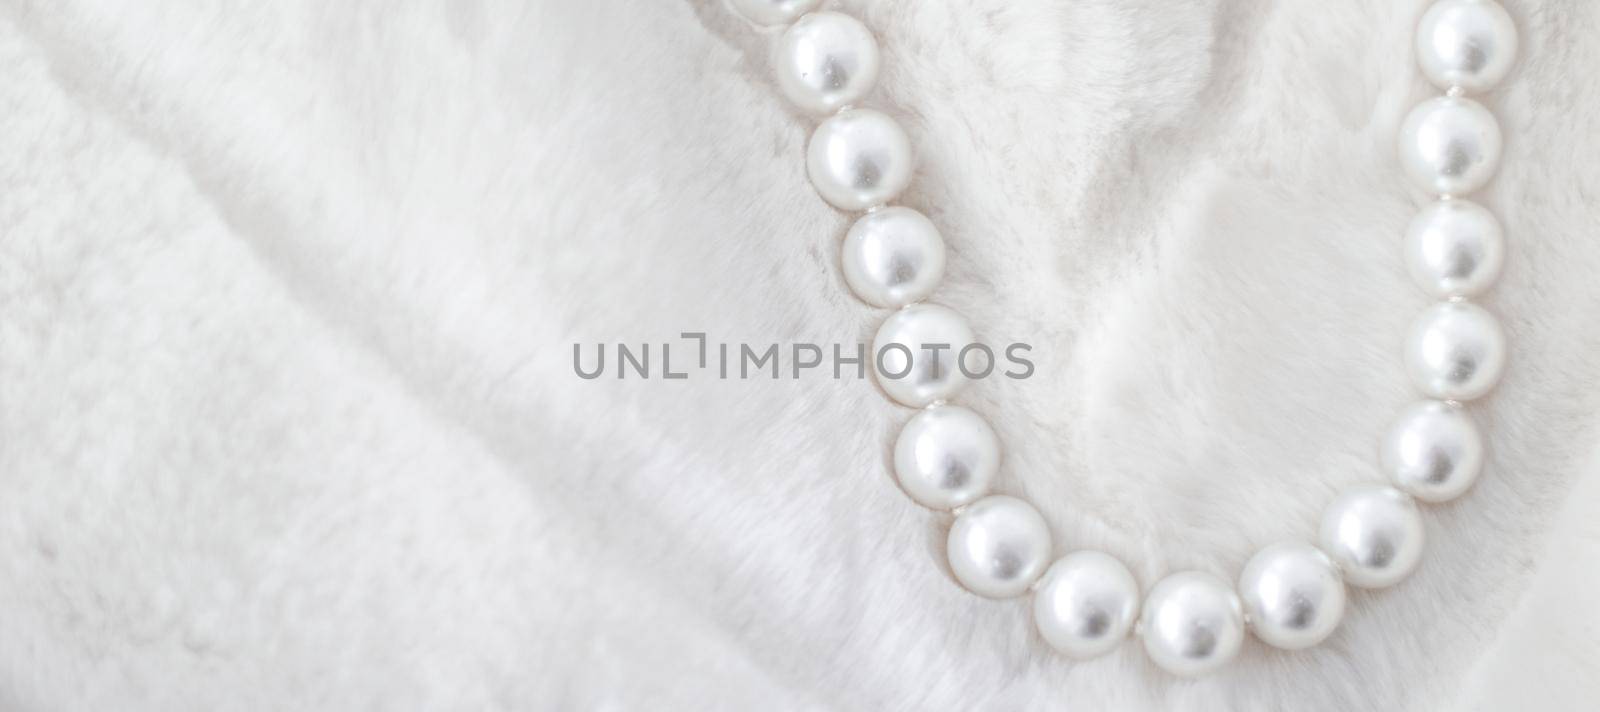 Winter holiday jewellery fashion, pearl necklace on fur background, glamour style present and chic gift for luxury jewelery brand shopping, banner design by Anneleven